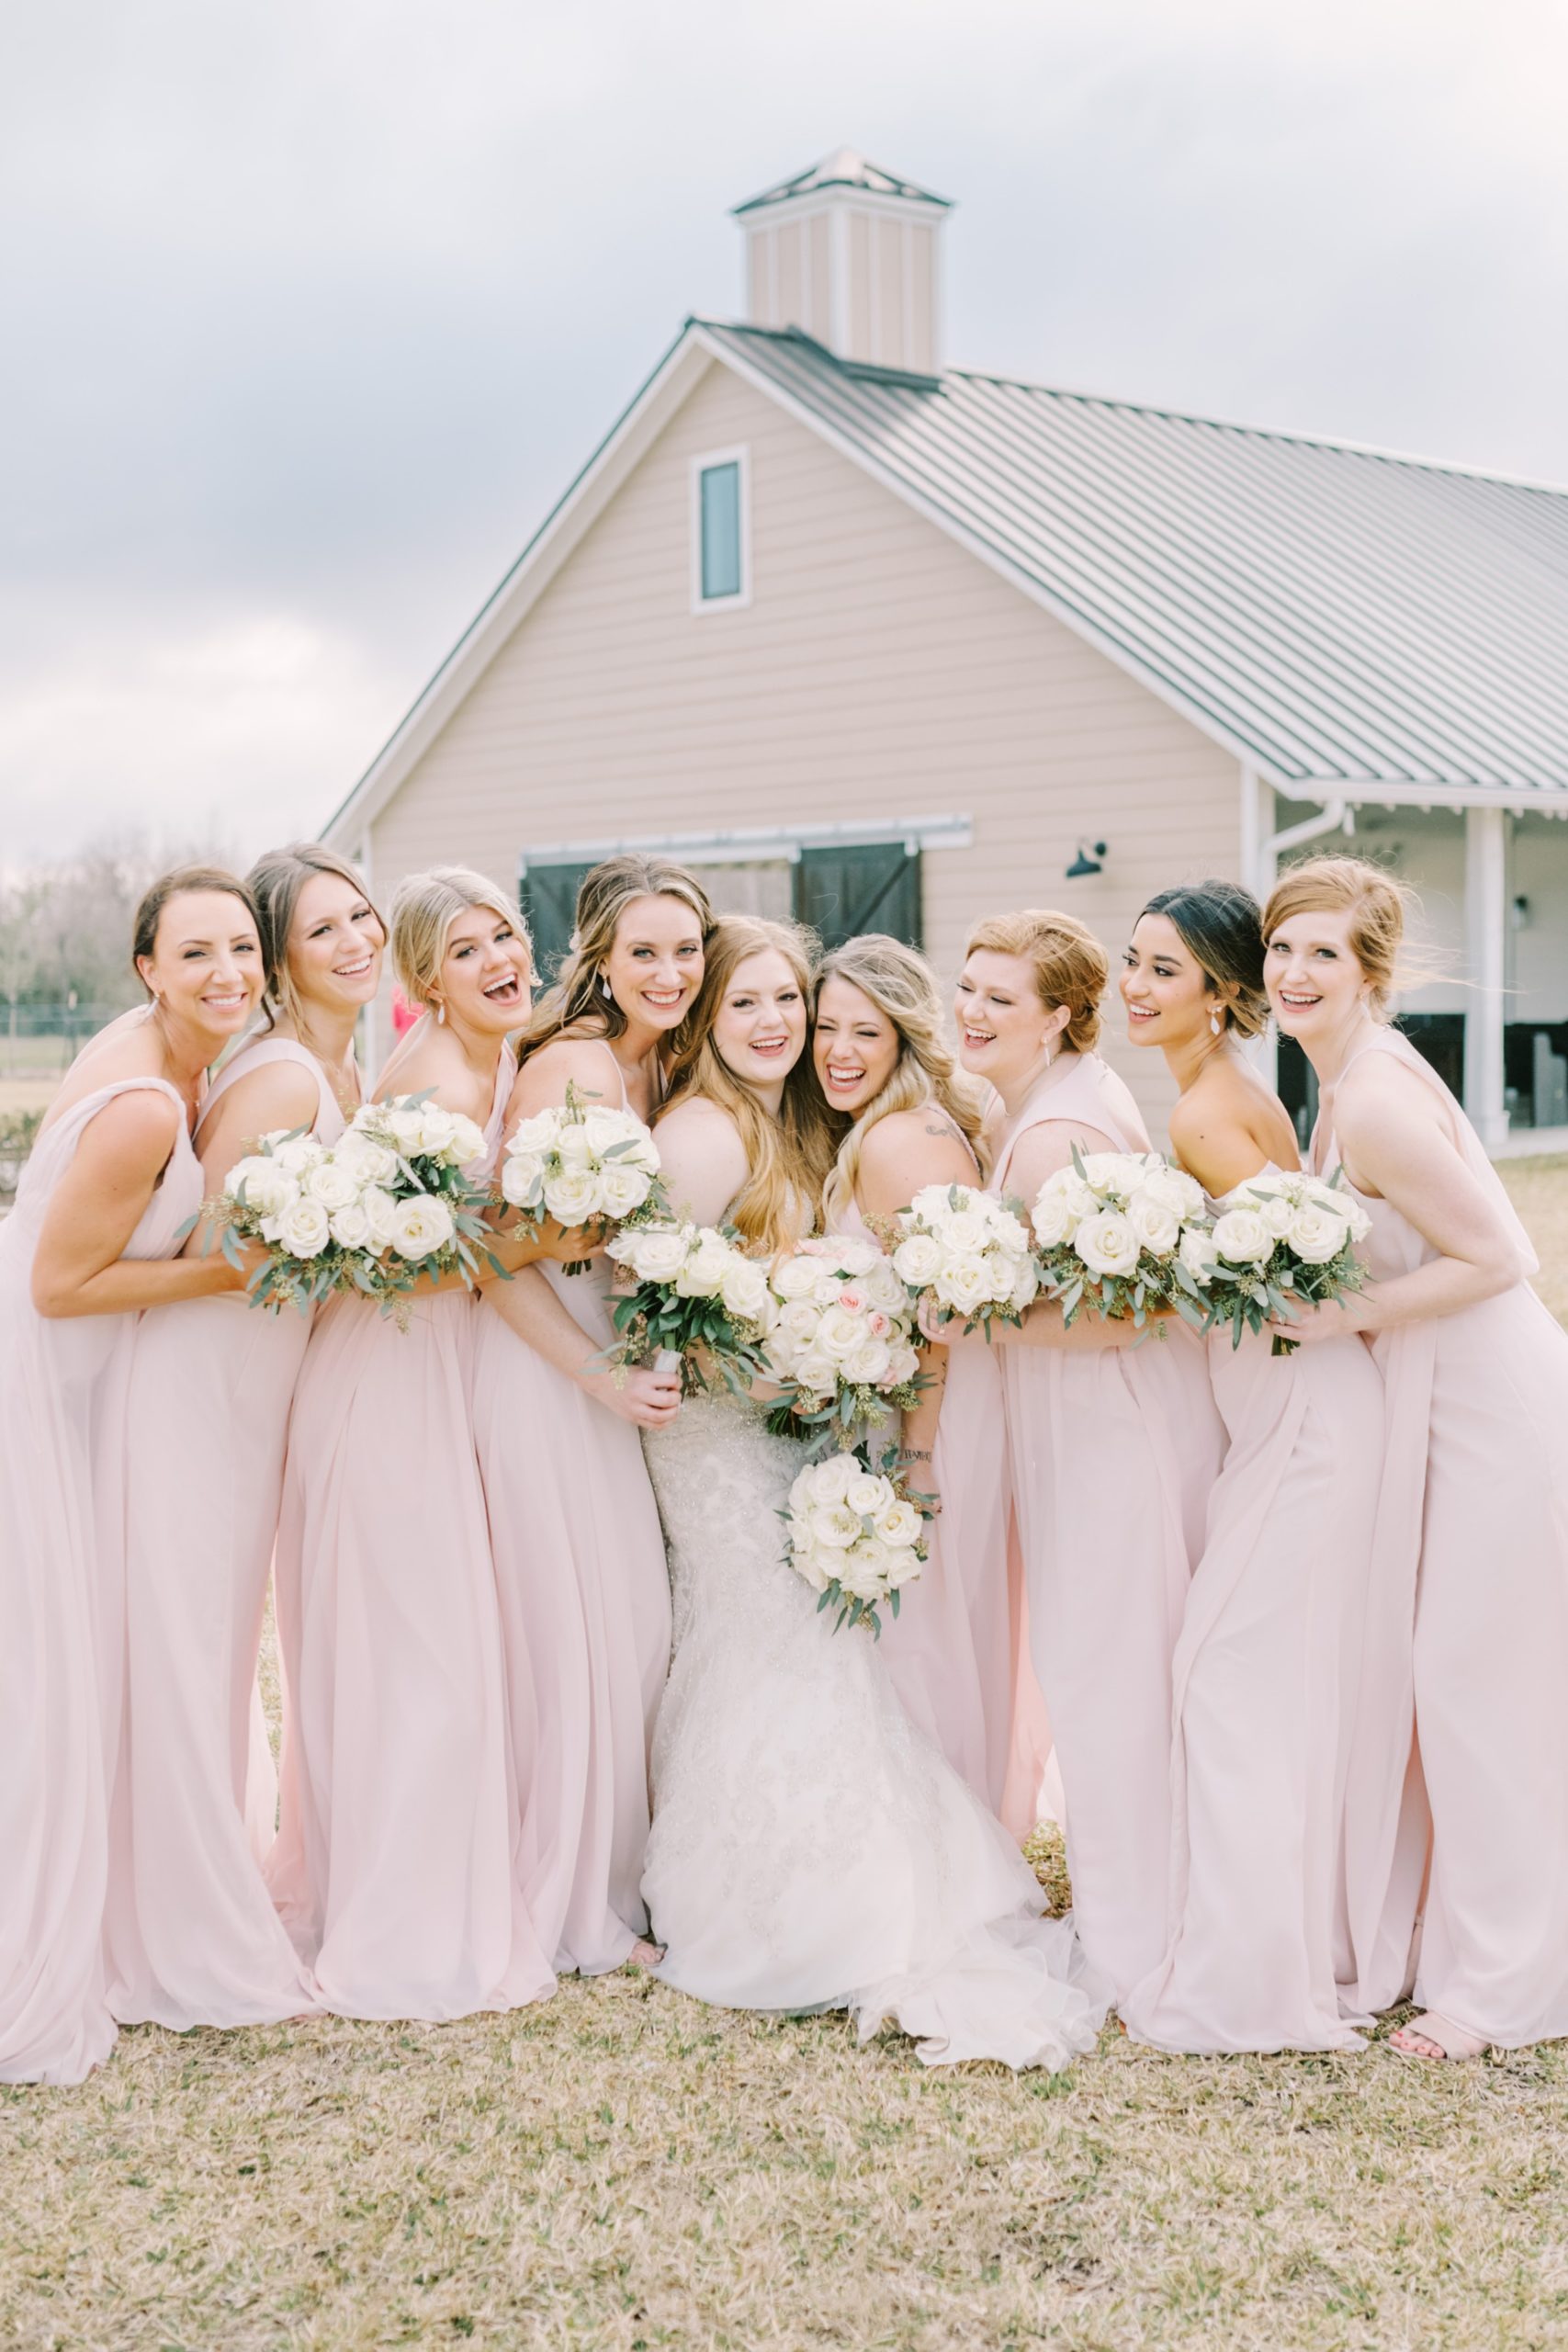 A bride laughs with her group of bridesmaids all squished together by Christina Elliott Photography. squished bridesmaid laugh #ChristinaElliottPhotography #ChristinaElliottWeddings #StillWatersRanchWedding #Texaswedding #countrywedding #ranchwedding